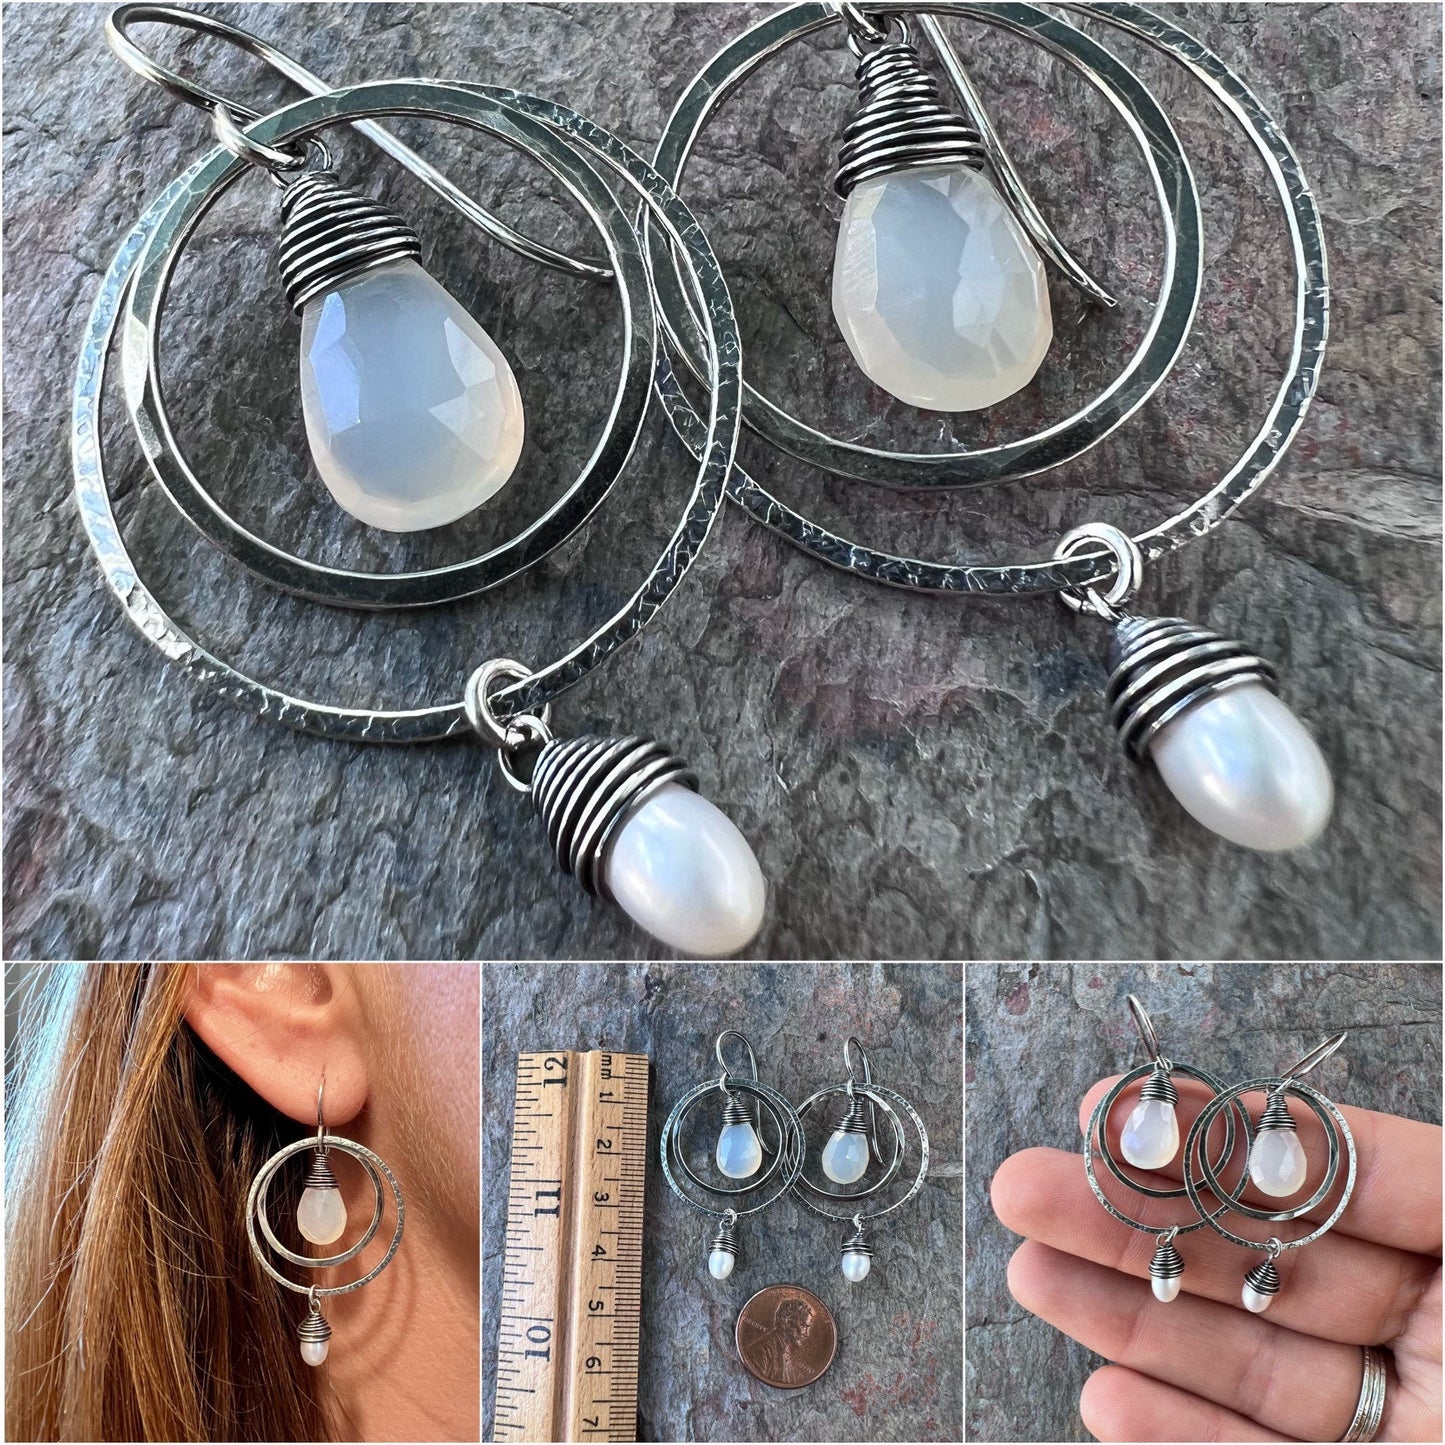 Pearl and Chalcedony Sterling Silver Earrings - Wire-Wrapped Pearls and Chalcedony Teardrops Earrings